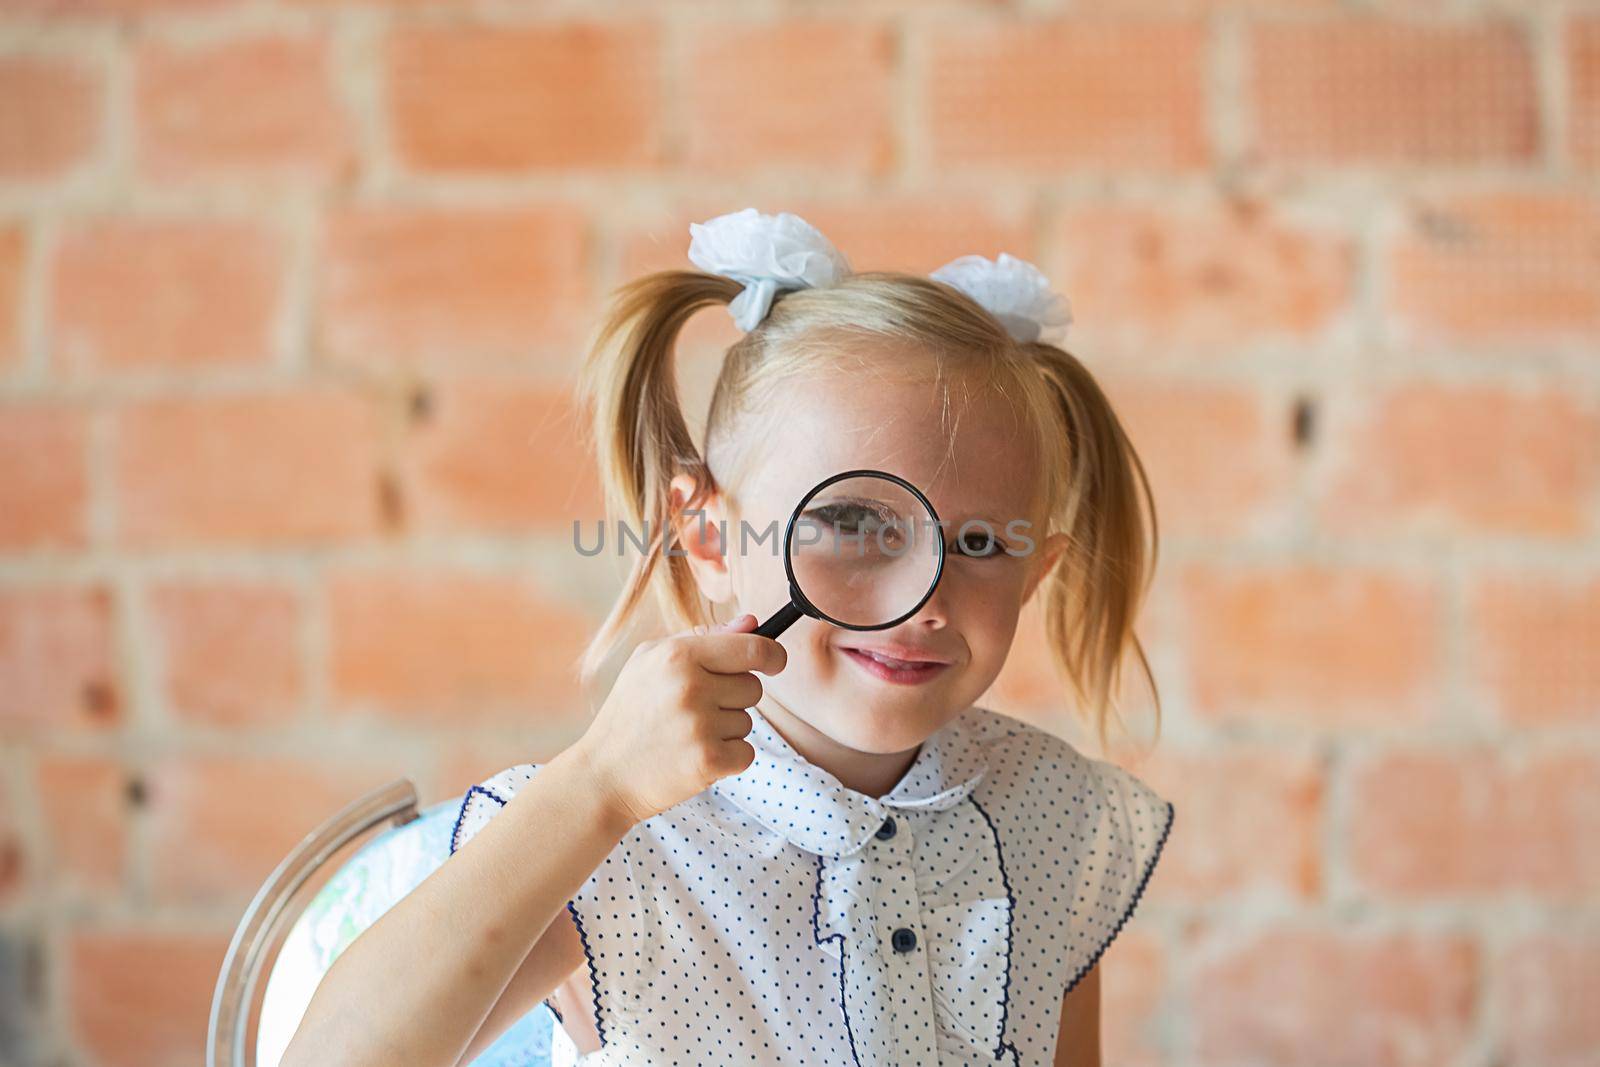 Cute little girl in school uniform with magnifier if front of her eye, back to school concept